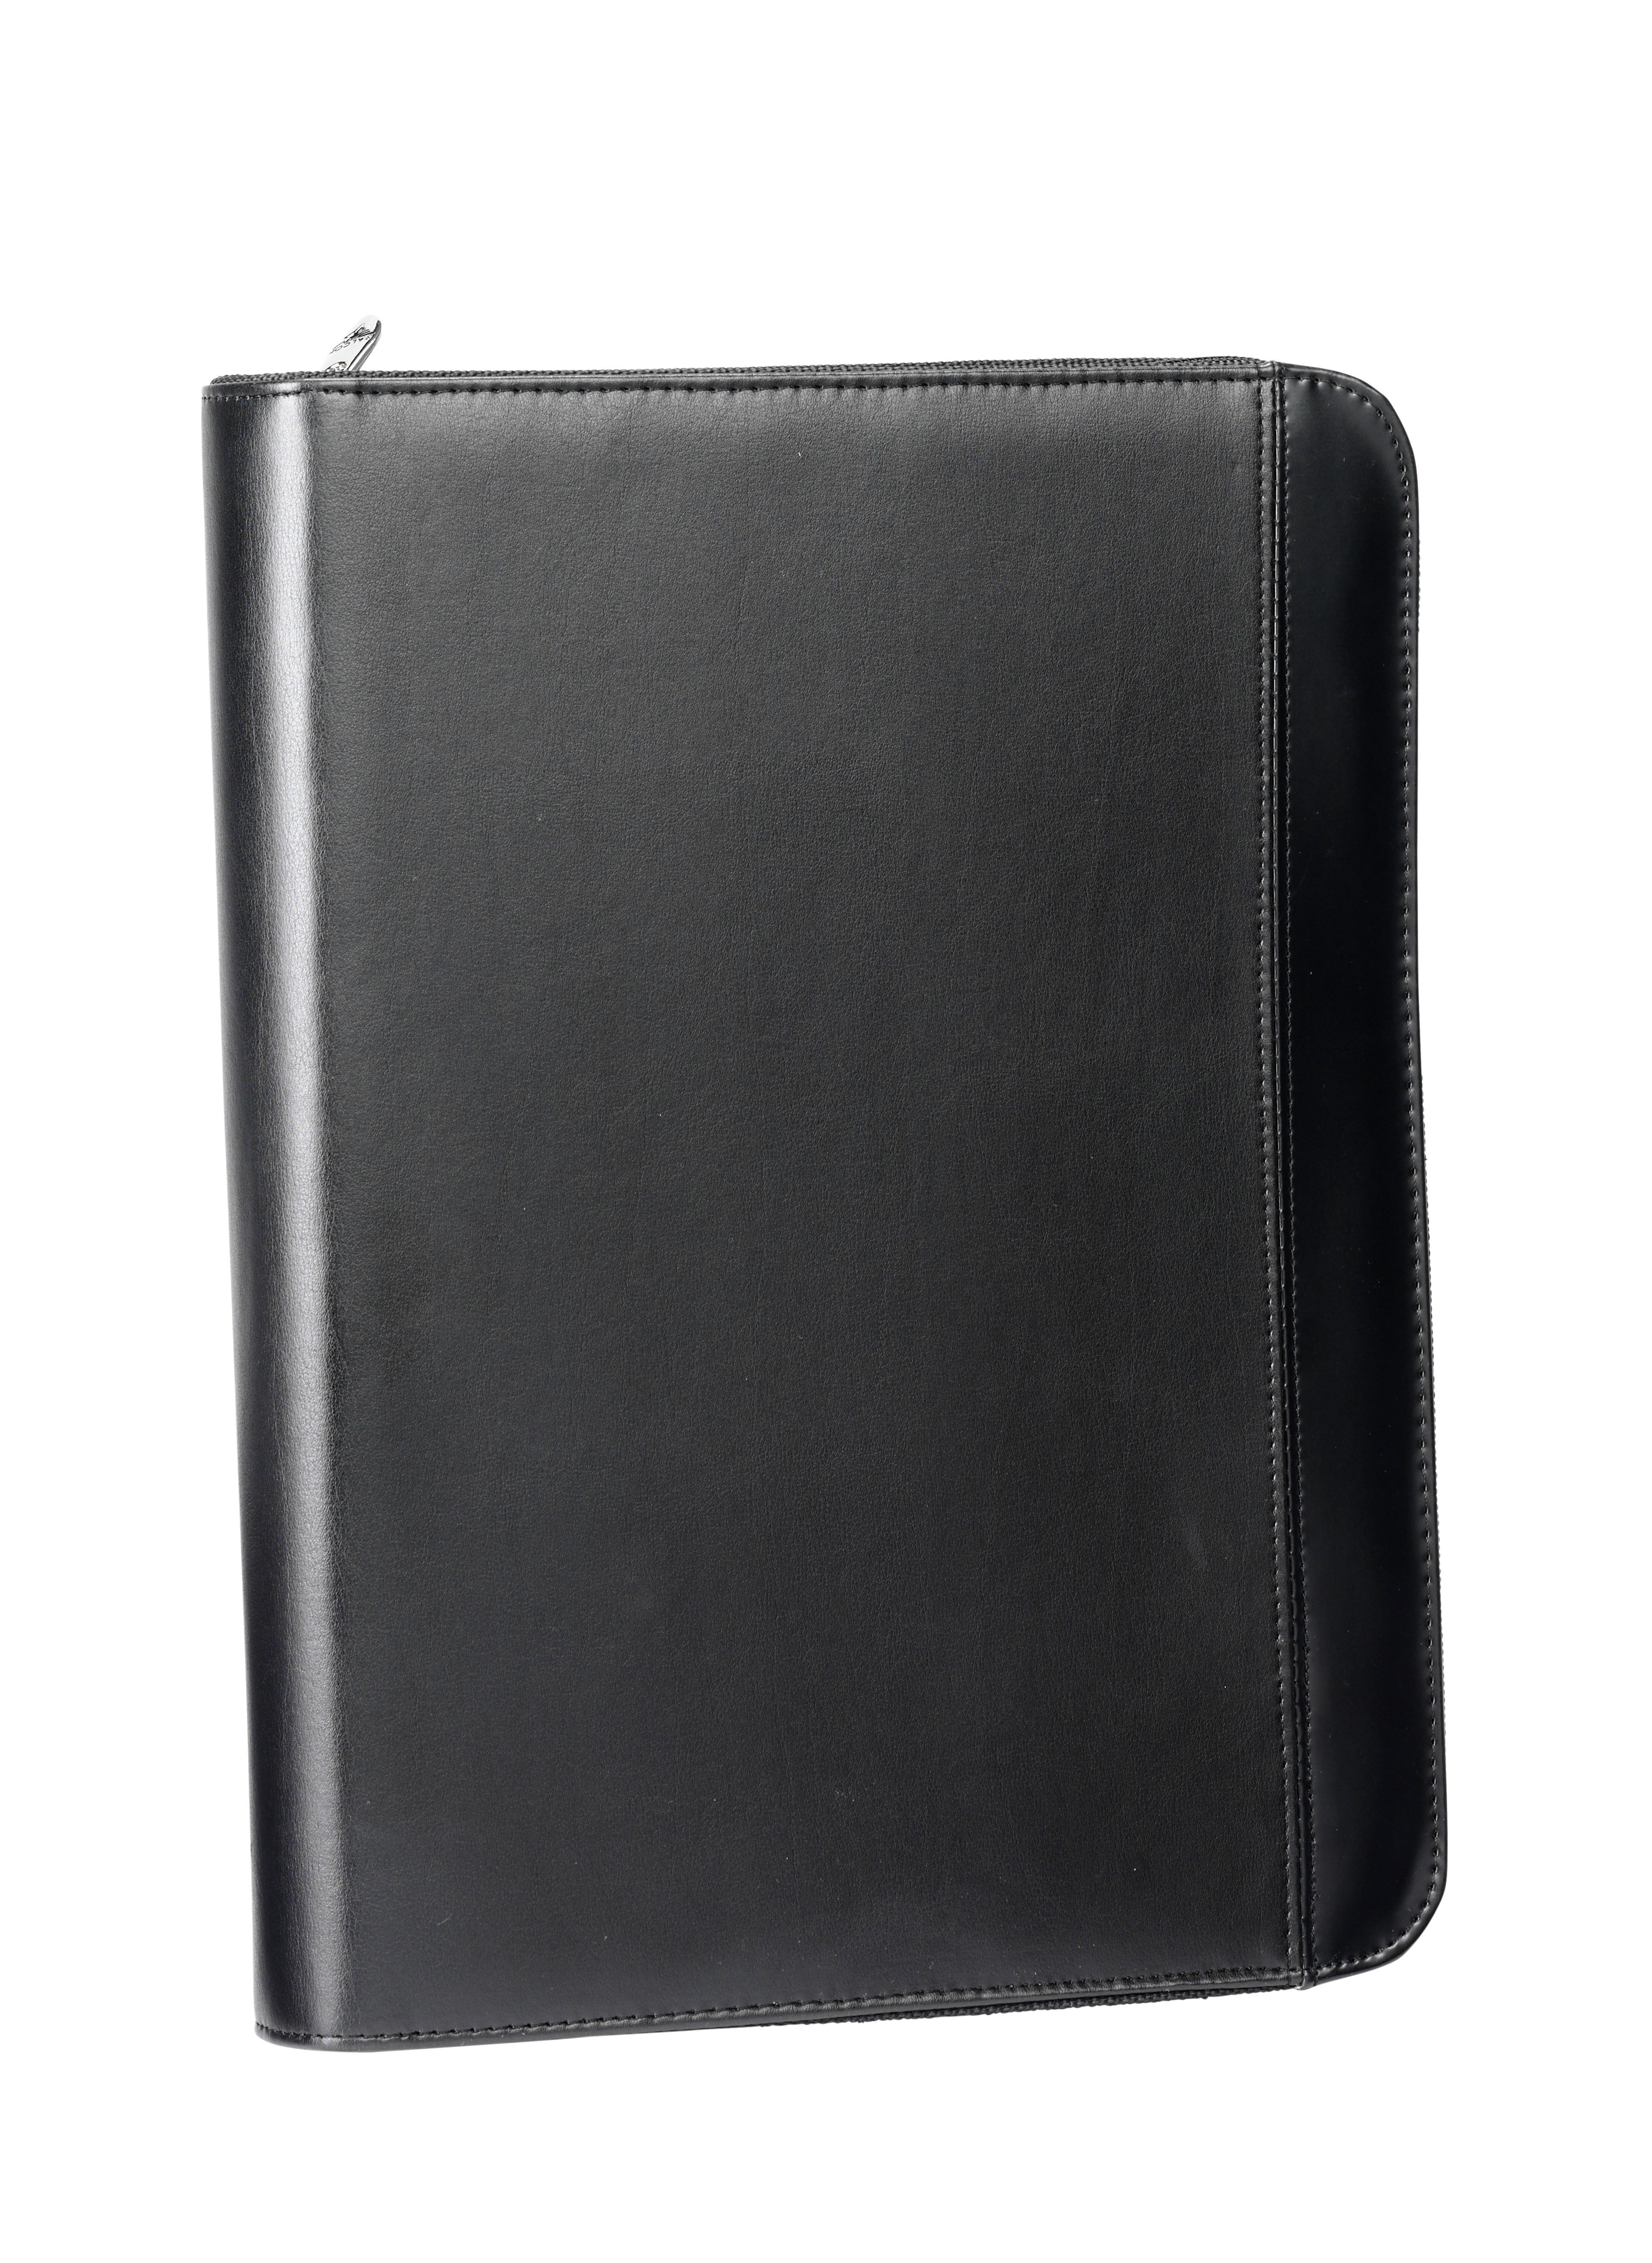 Falcon A4 iPad/Tablet Faux Leather Zip Around Conference Folder With Calculator - FI6521 Black 